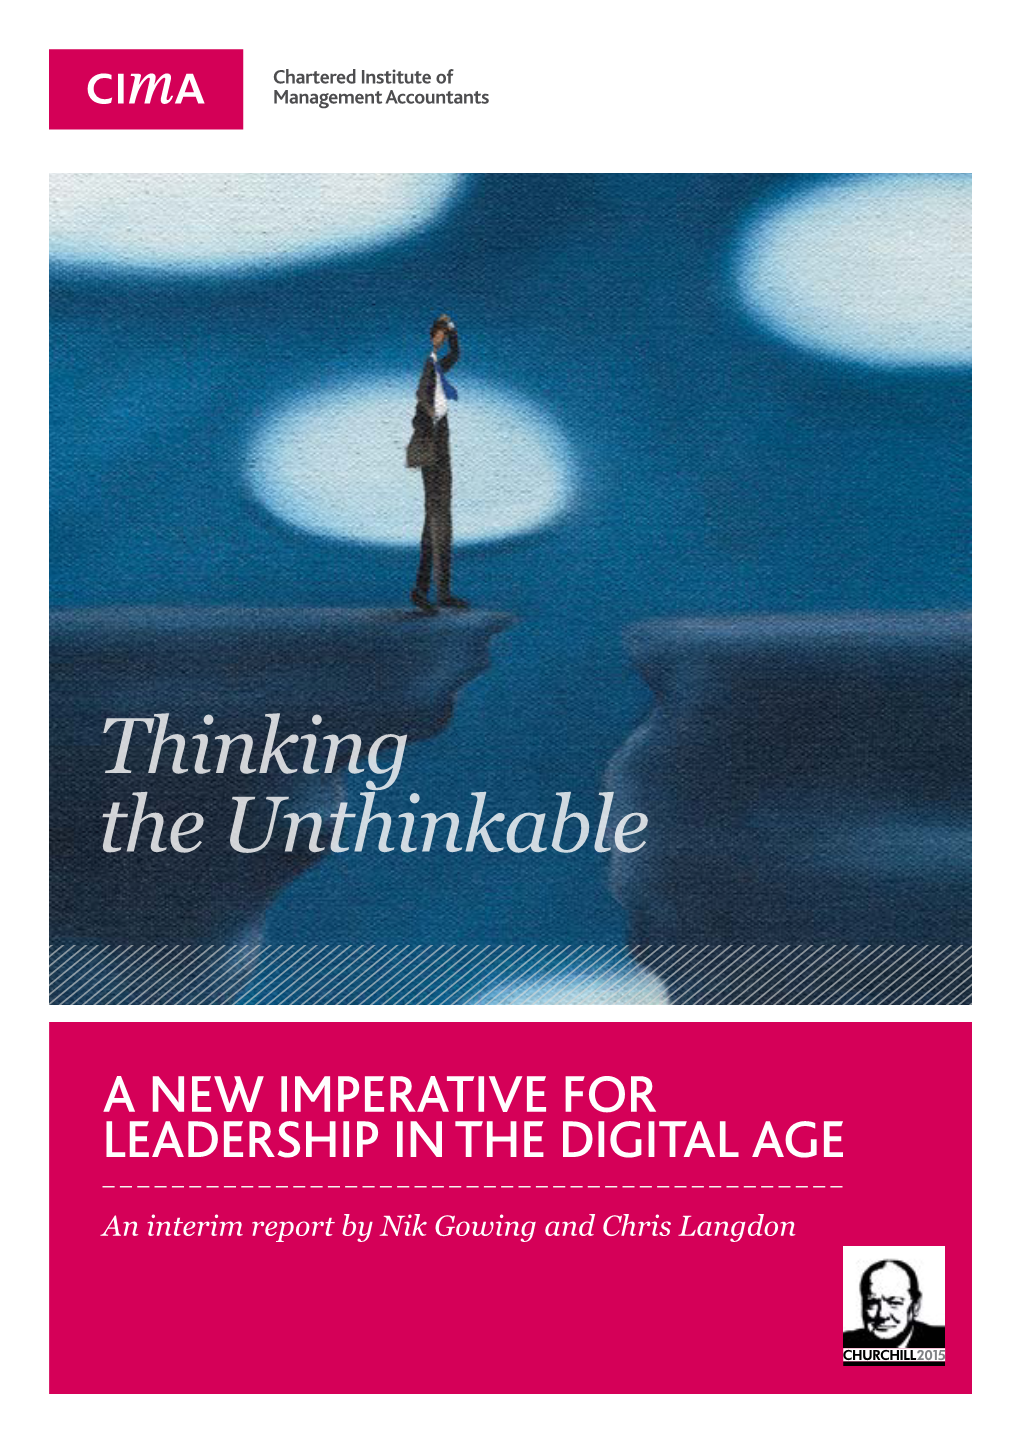 Thinking the Unthinkable – a New Imperative for Leadership in the Digital